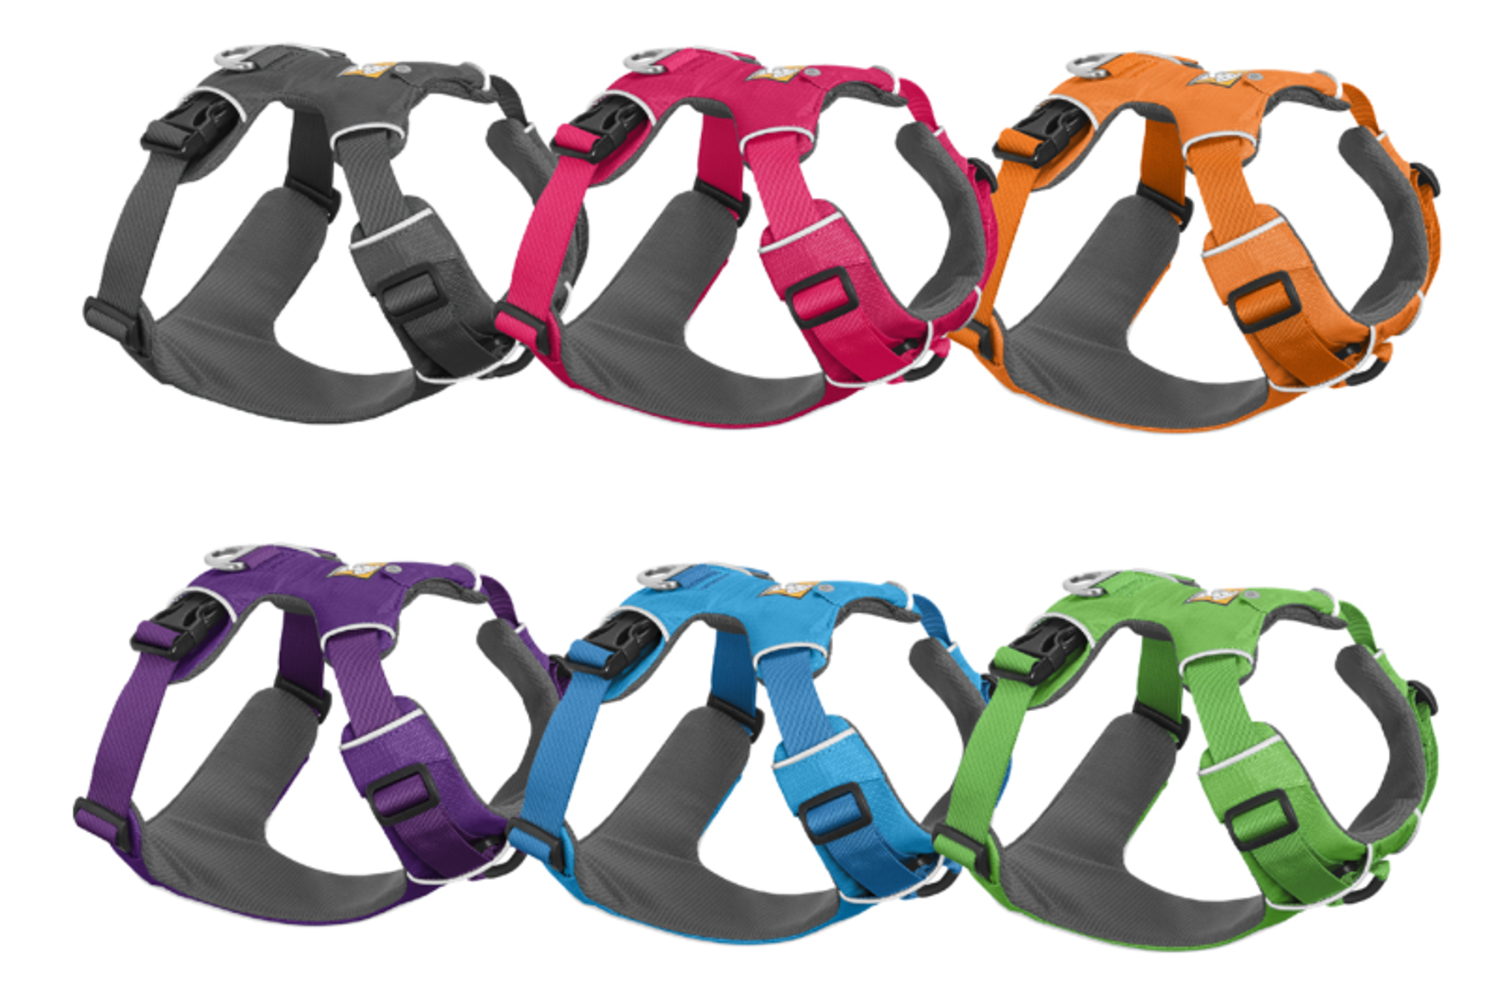 RUFFWEAR FRONT HARNESS - Paws on Chicon